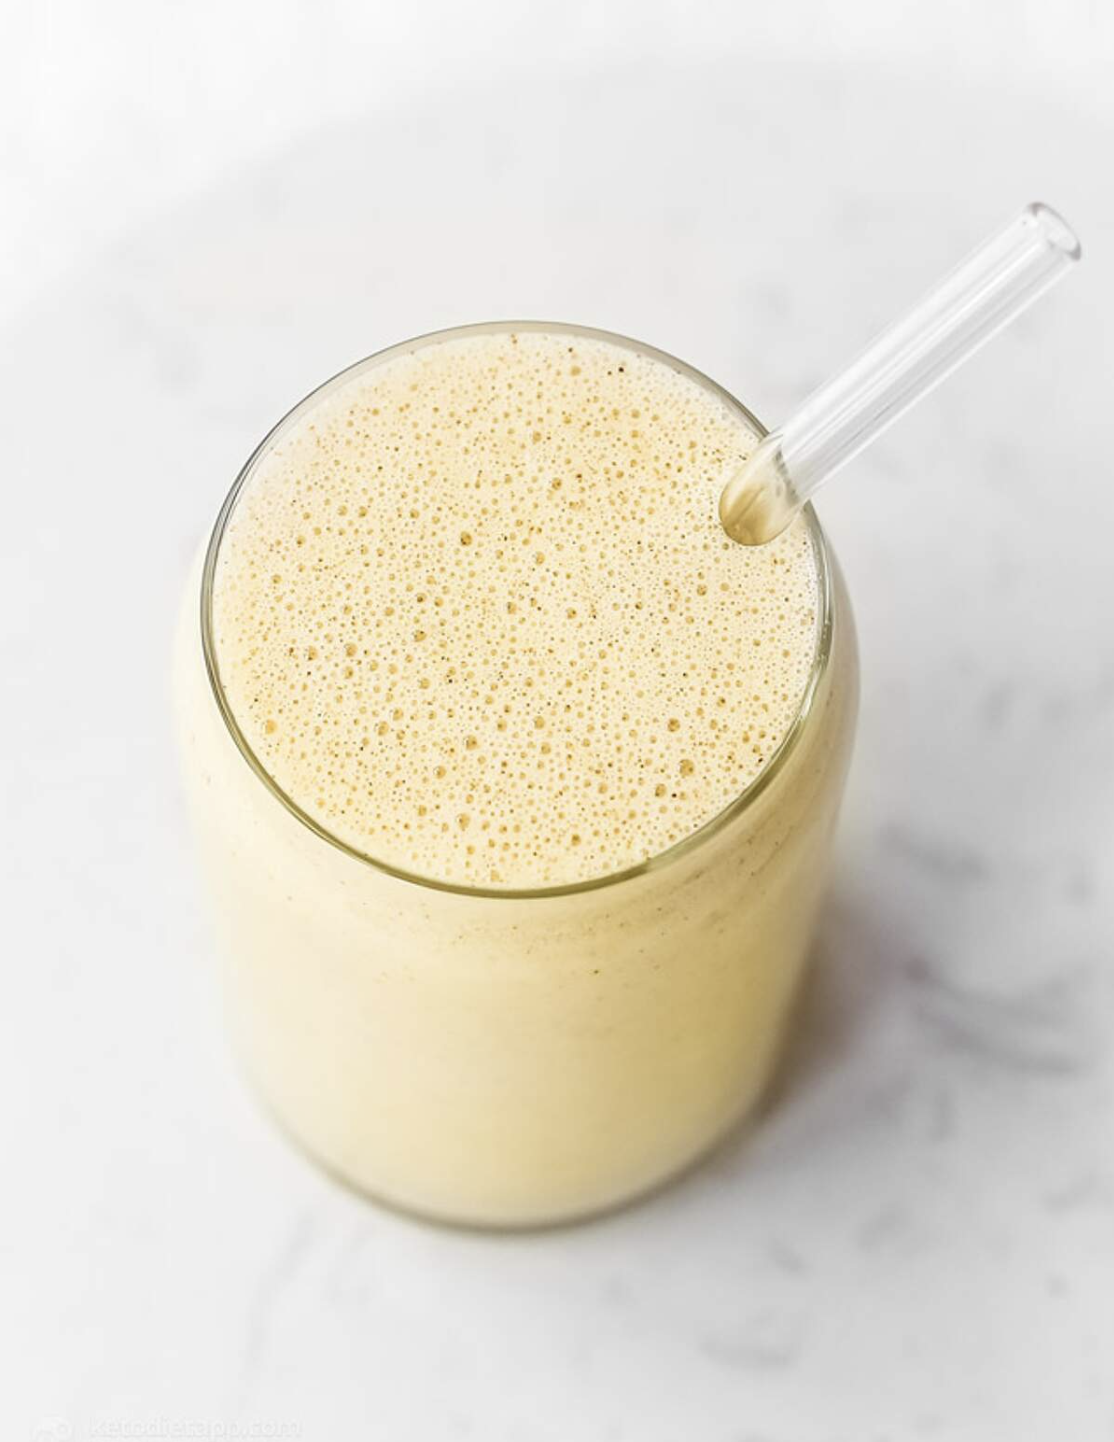 13 Best Keto Smoothie Recipes For Weight Loss